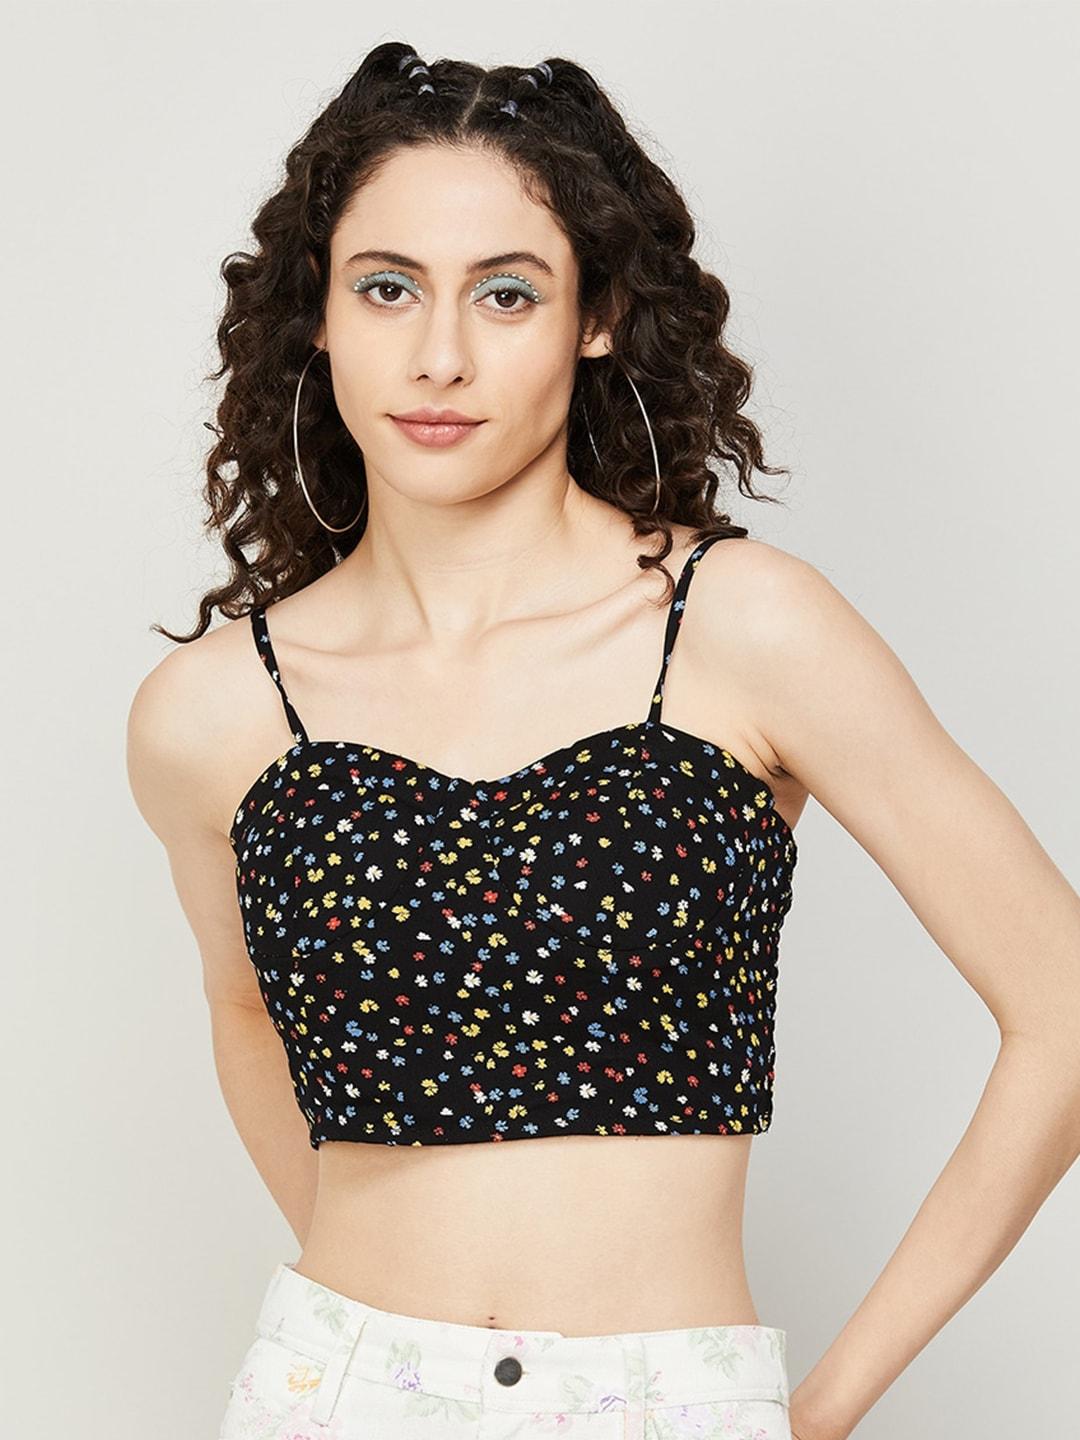 ginger-by-lifestyle-floral-print-bralette-crop-top